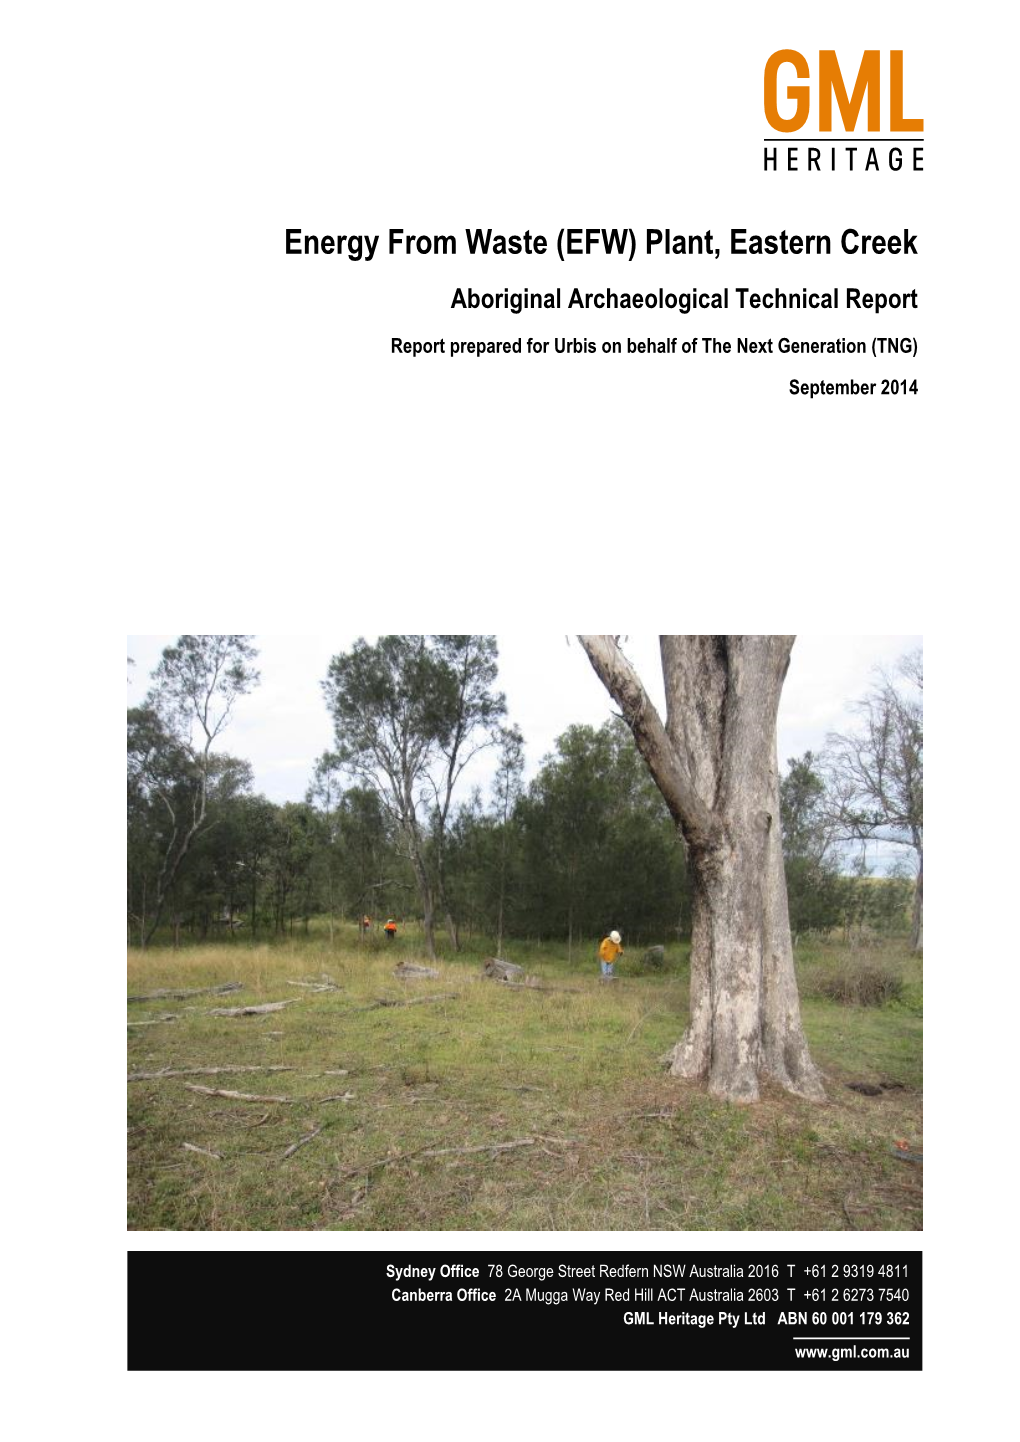 Energy from Waste (EFW) Plant, Eastern Creek Aboriginal Archaeological Technical Report